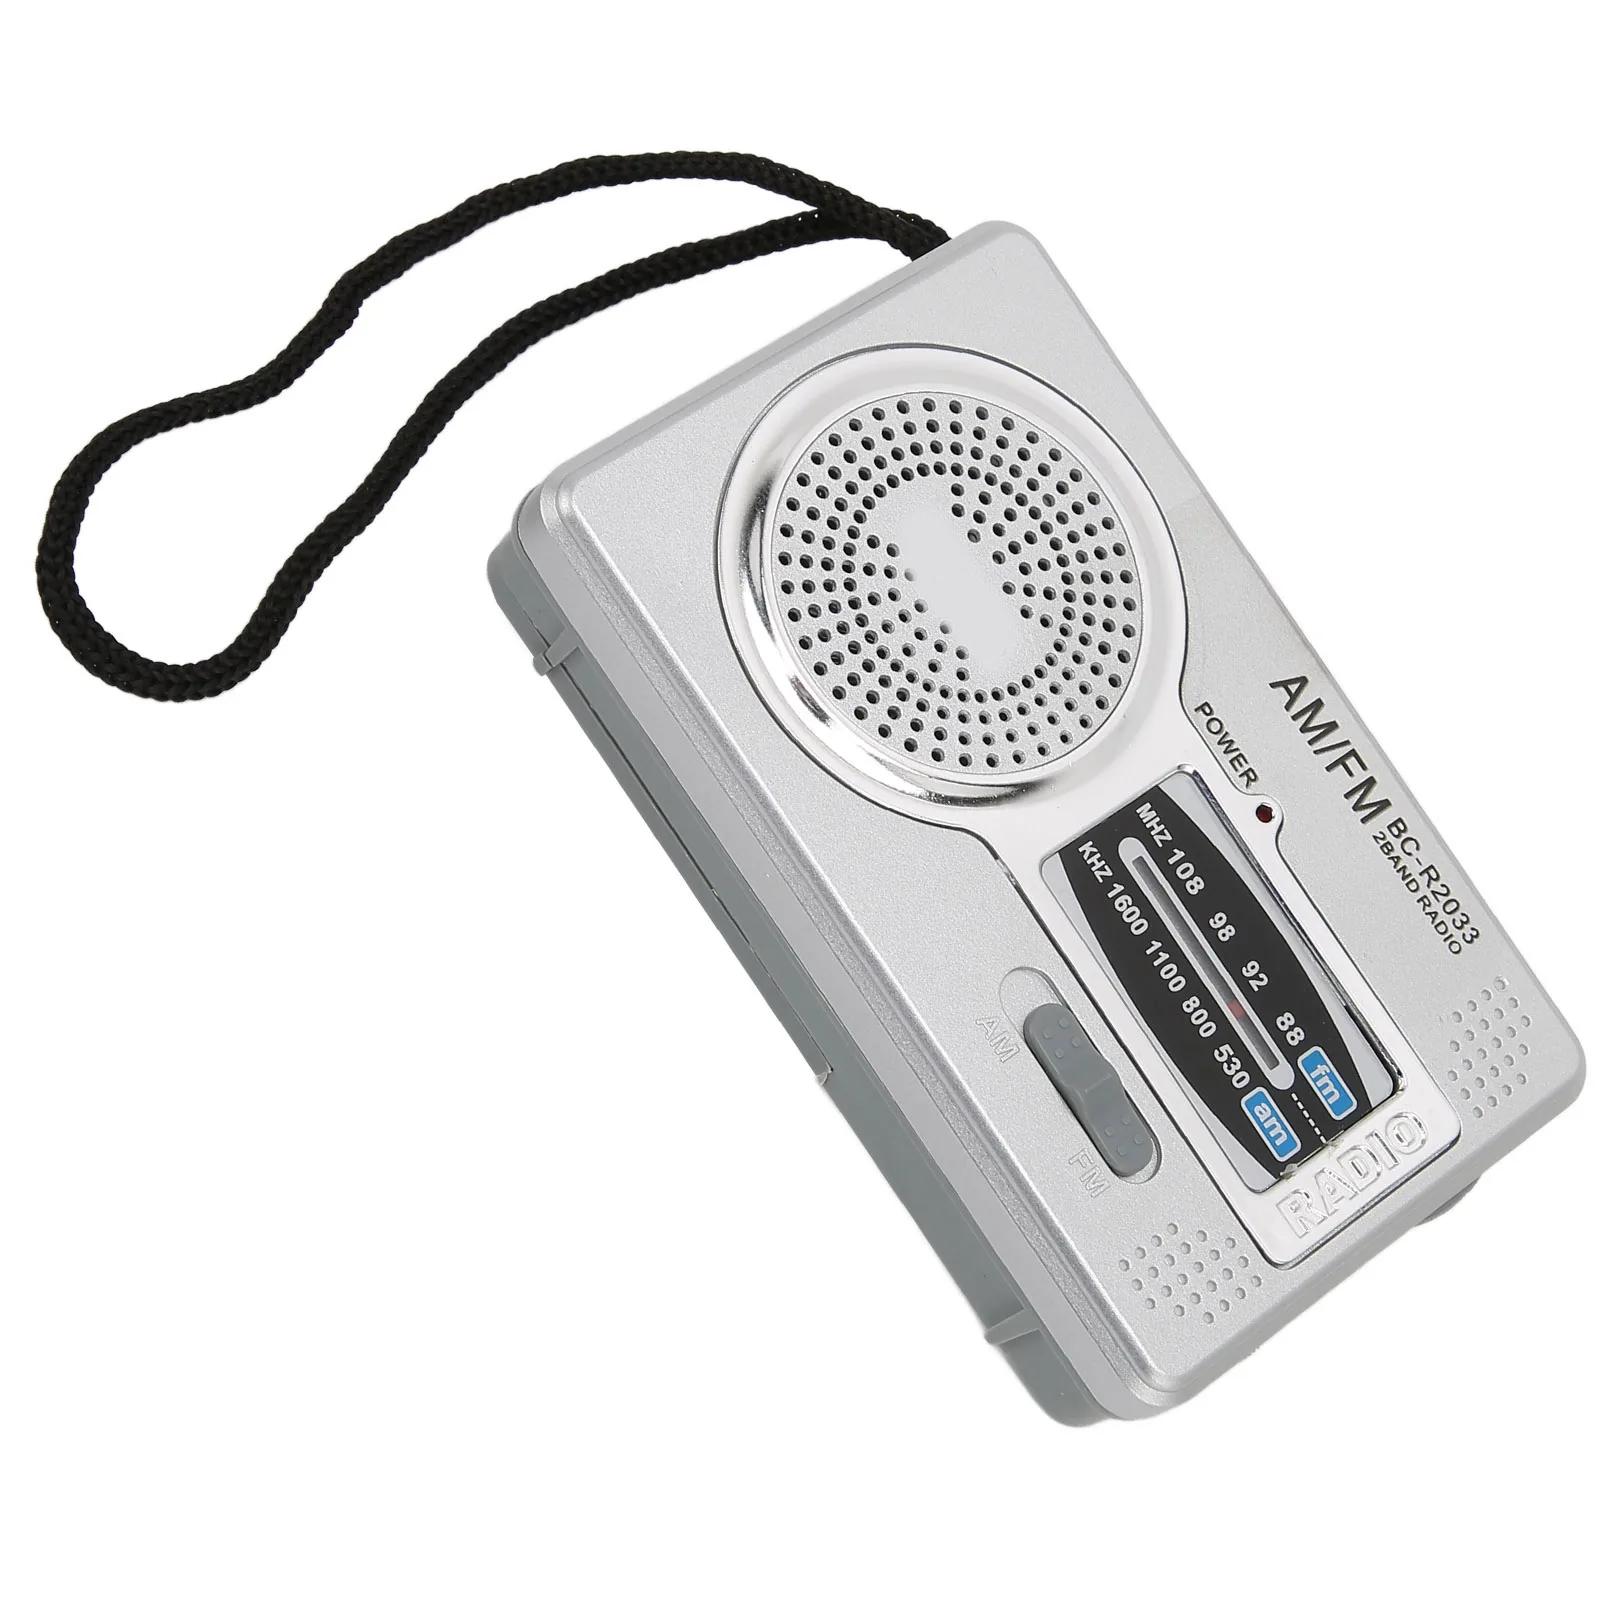 AM FM Transistor Radio Chip Portable Pocket Mini Radio with Built in 5W Speaker For Home Outdoor